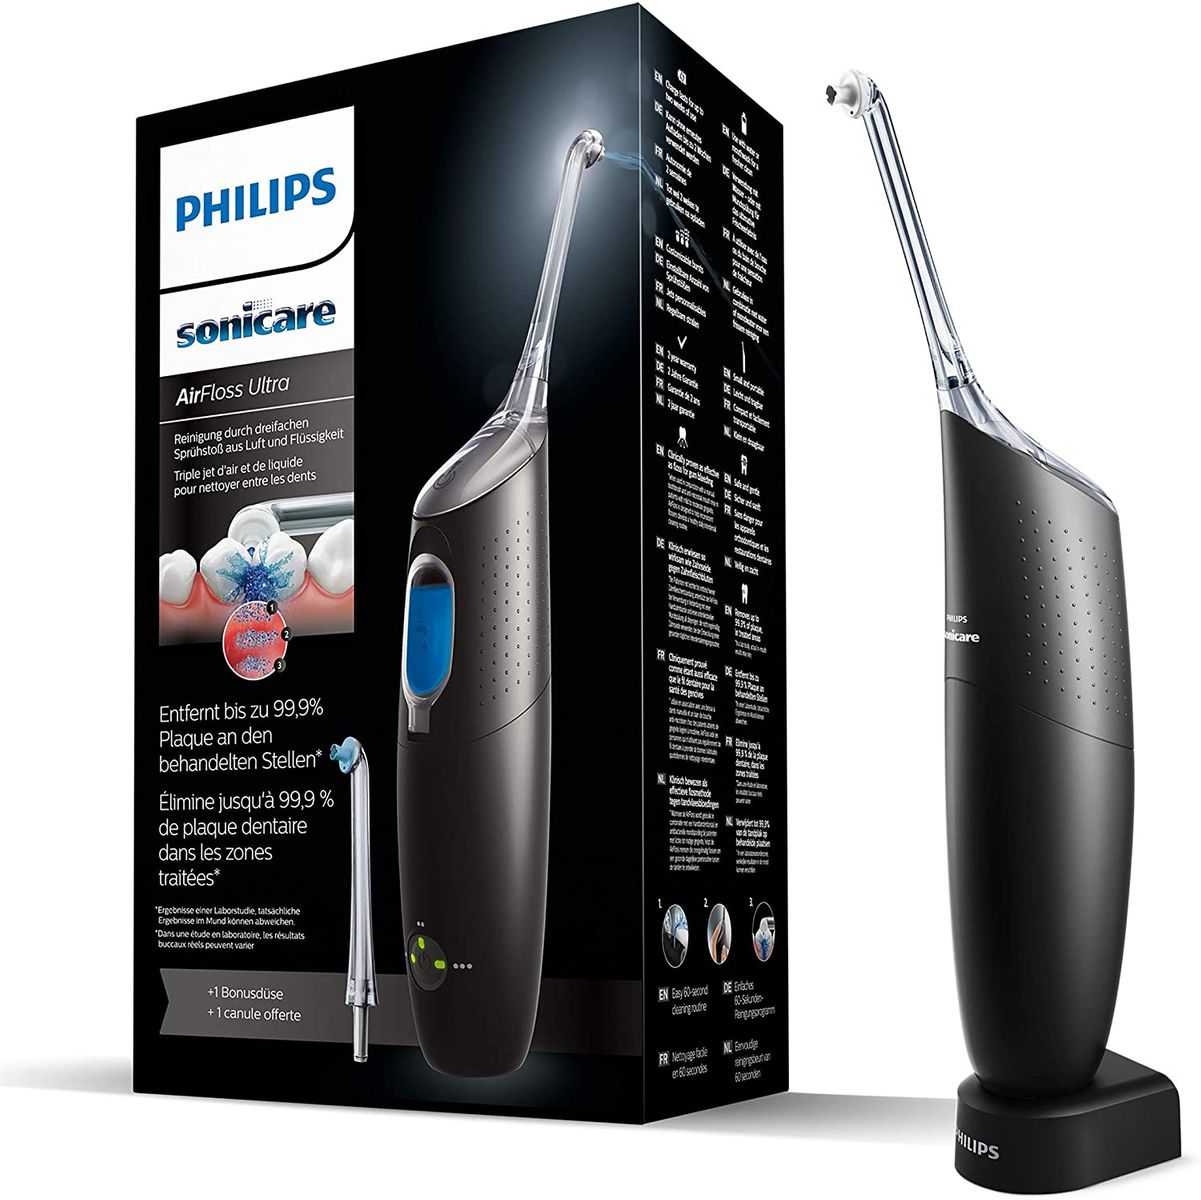 Philips Sonicare AirFloss Ultra for interdental cleaning HX8438/03, cleaning in 60 sec, high-performance nozzle, black-grey.